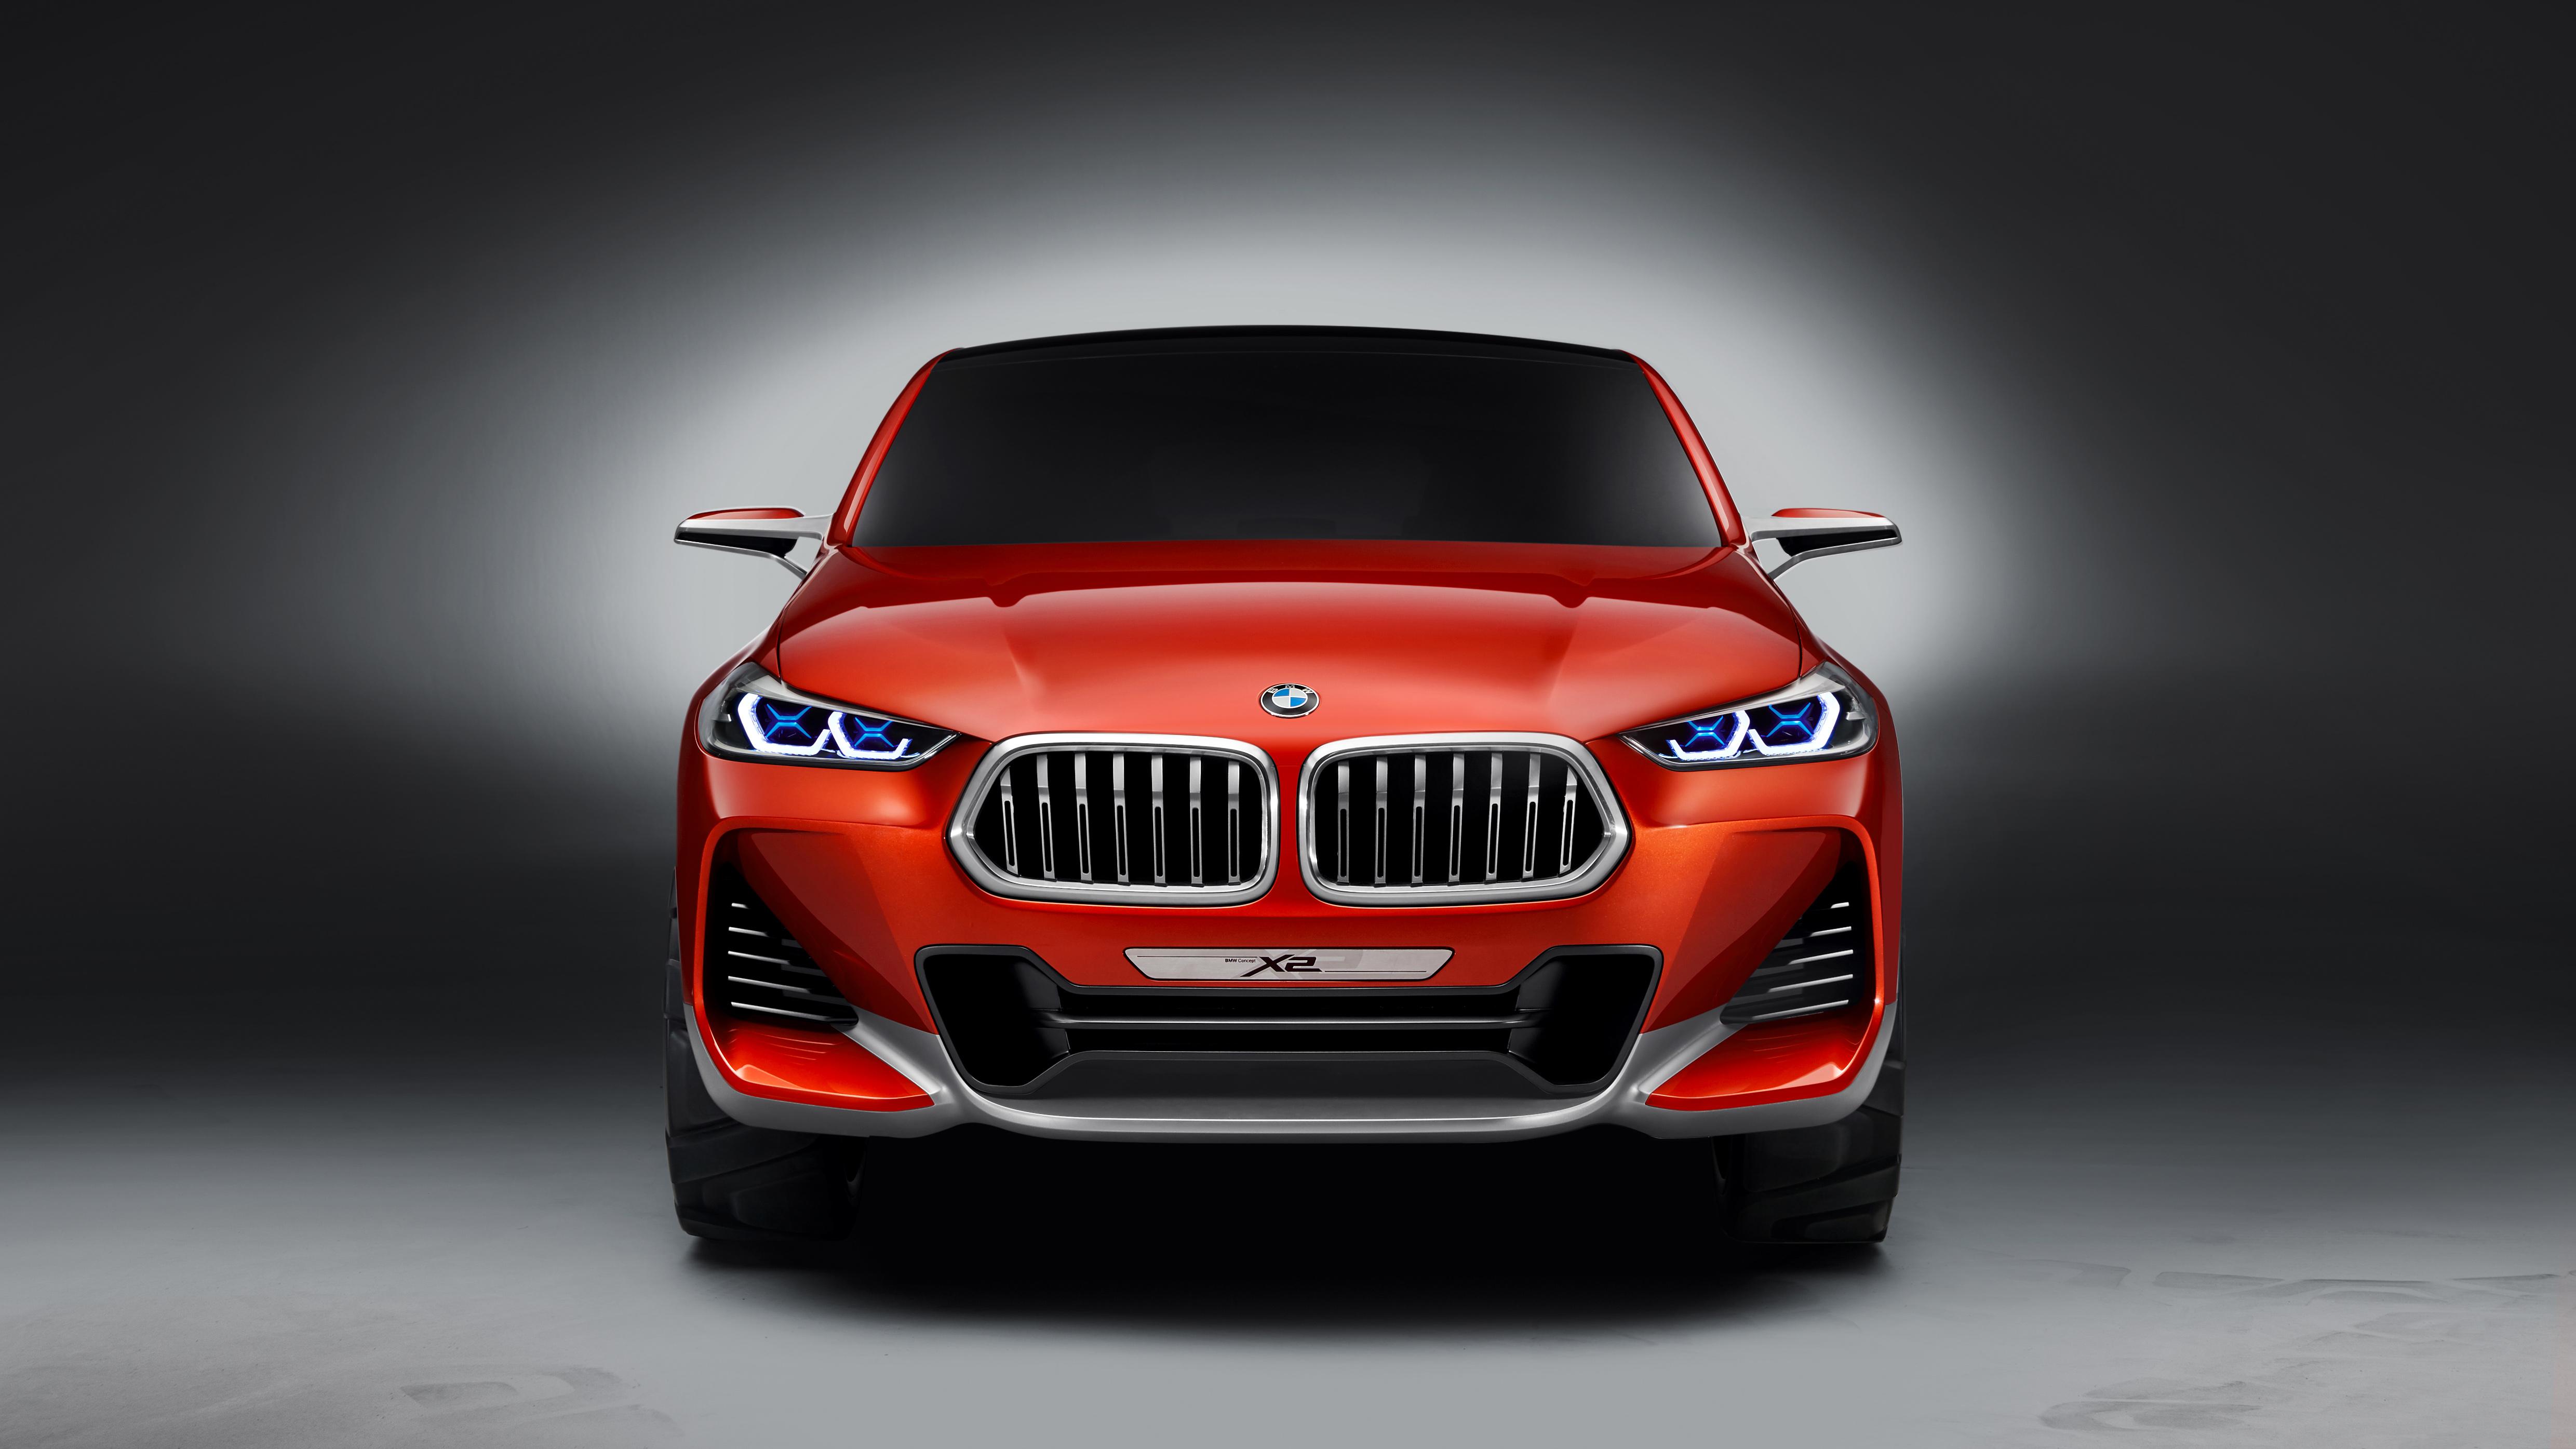 Bmw X2 Wallpapers Top Free Bmw X2 Backgrounds Wallpaperaccess